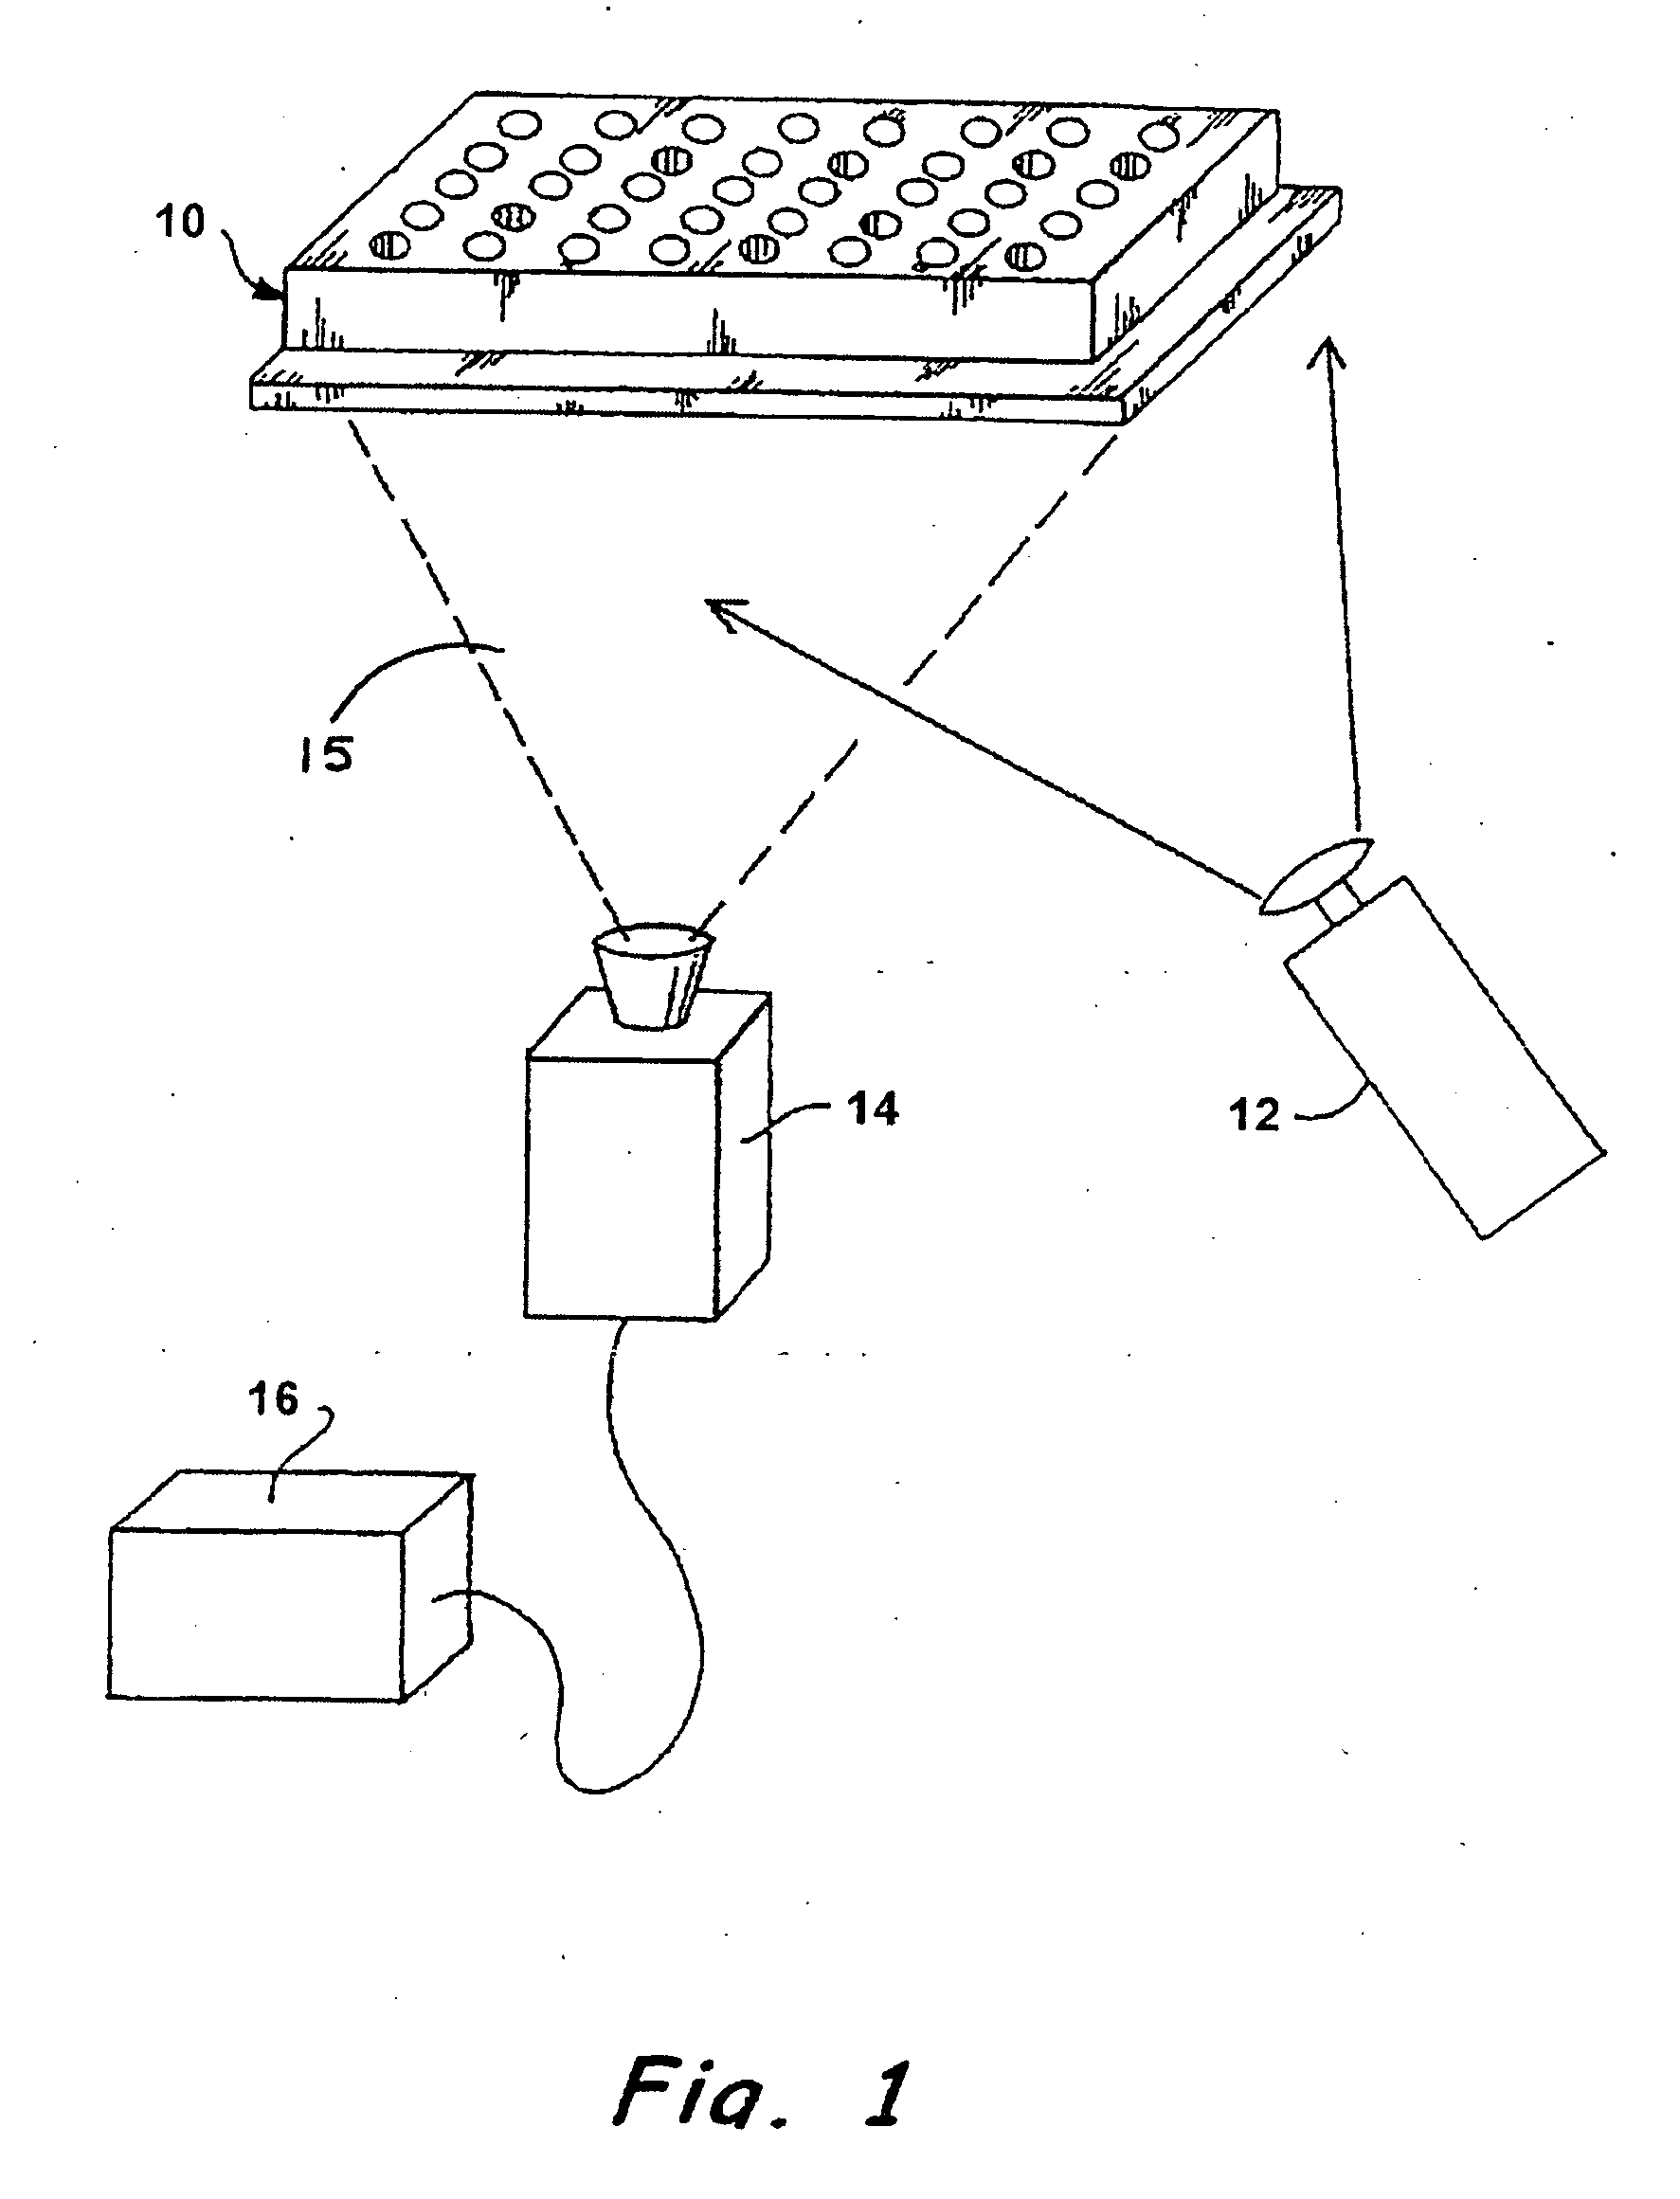 Reflective optic system for imaging microplate readers